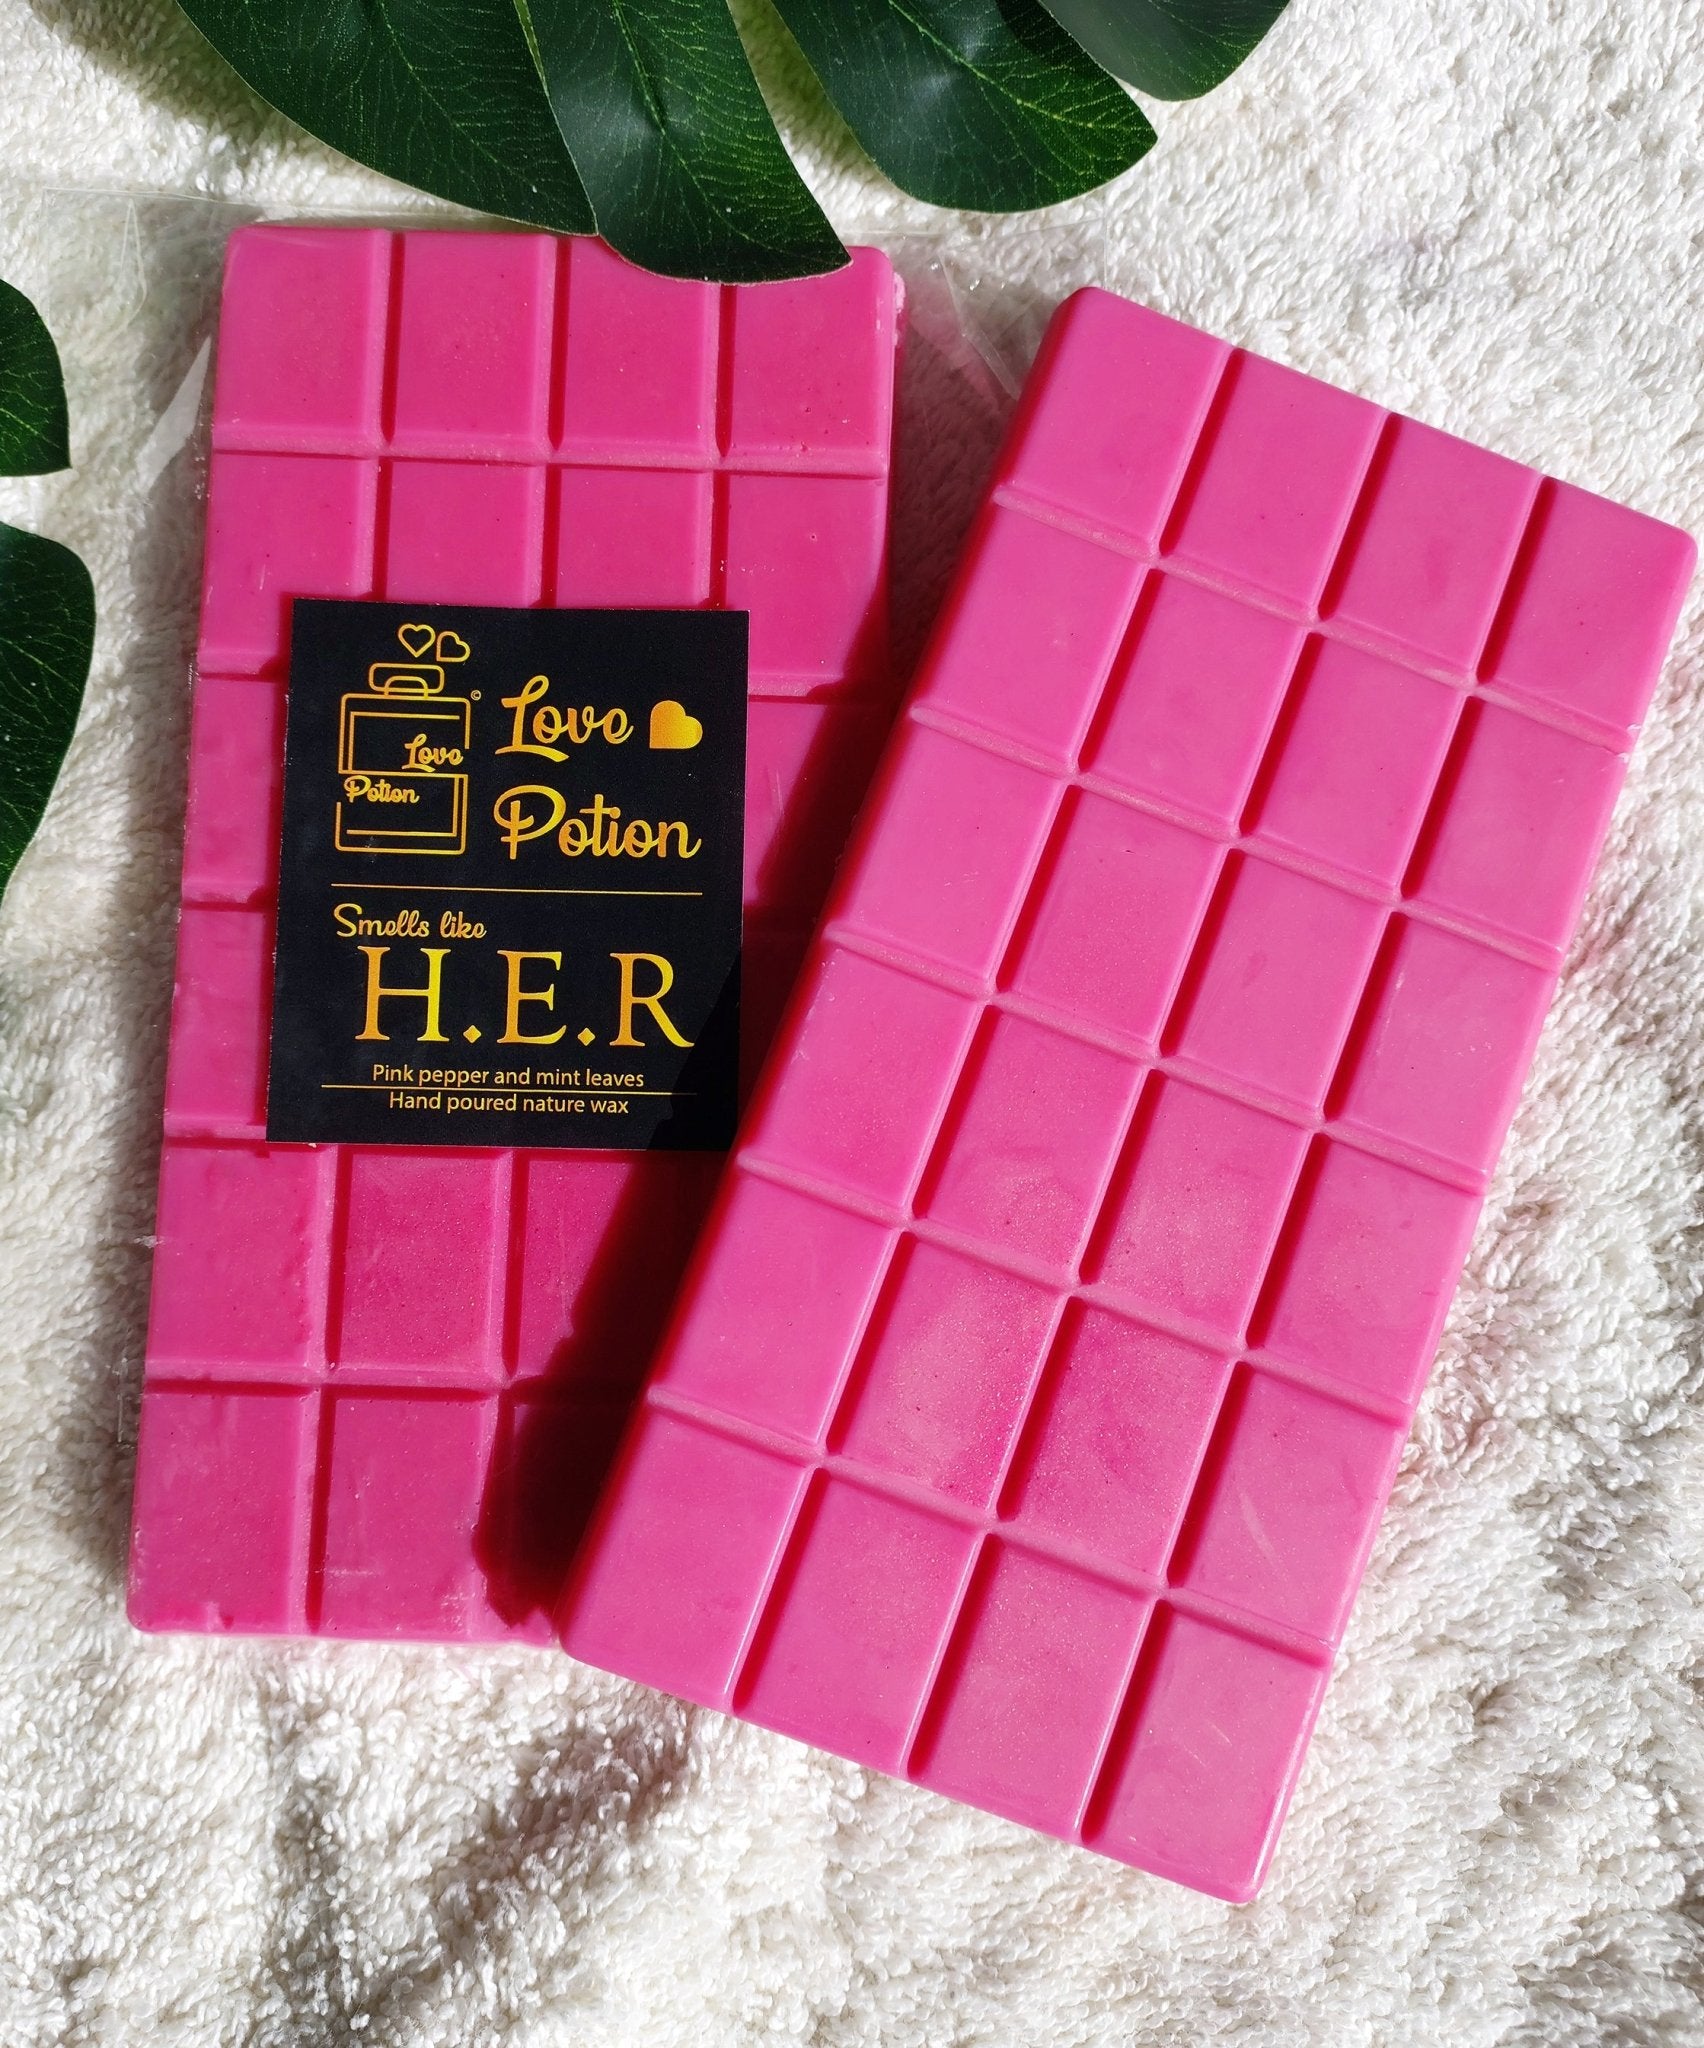 Smells like H.E.R - Wax Snap Bar - Lovepotion